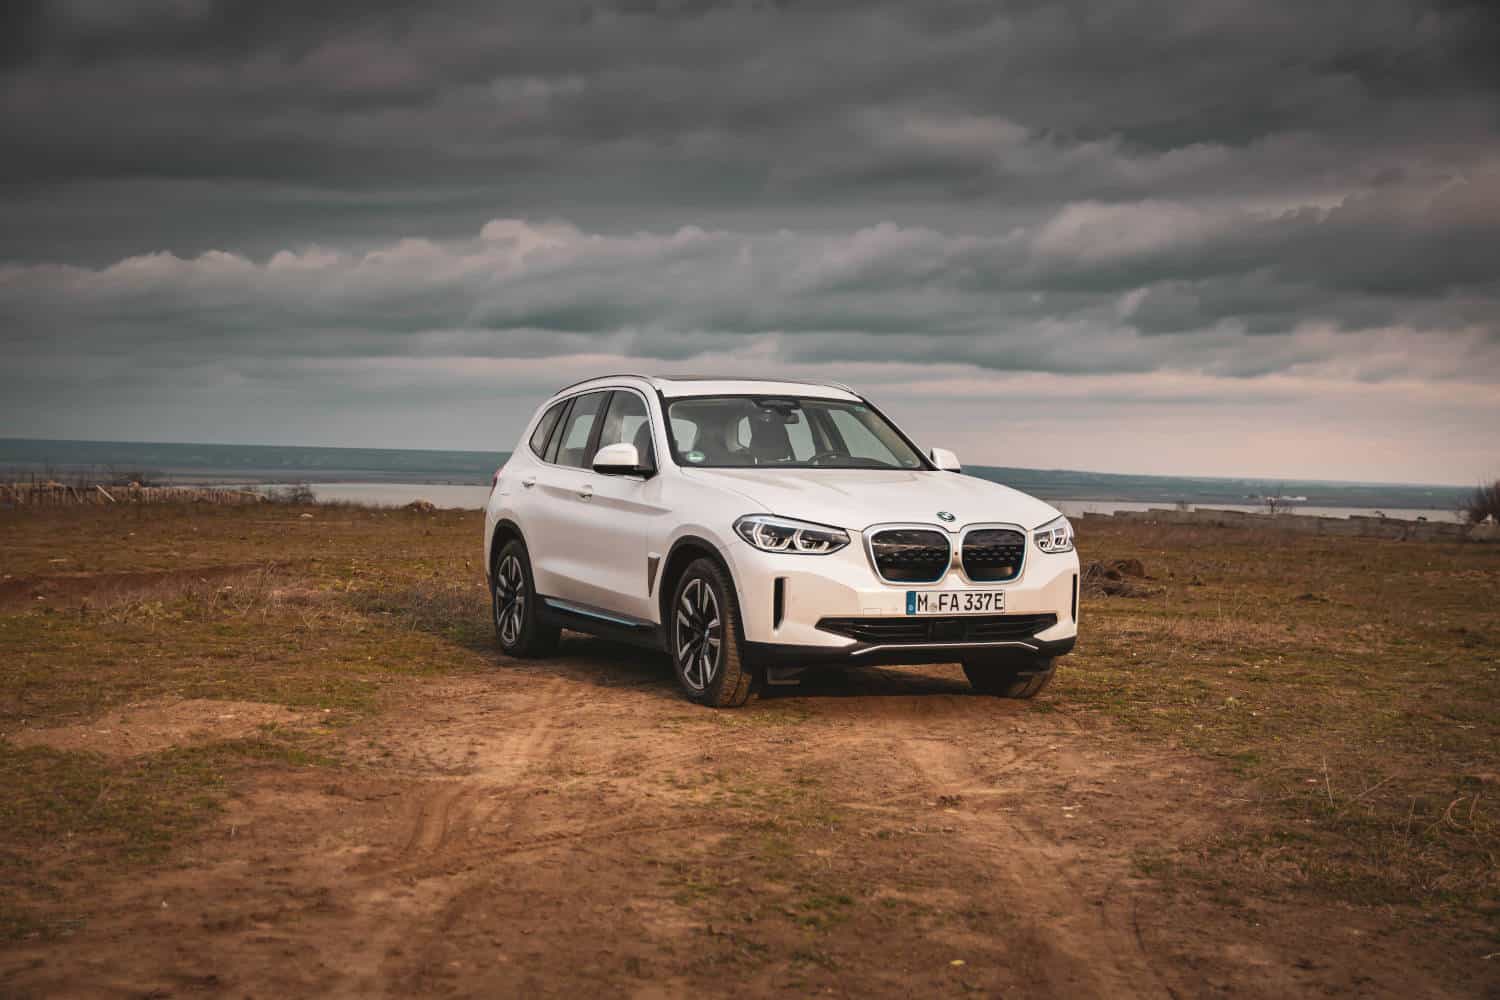 A silver BMW X3 parked against a scenic backdrop, showcasing its sleek design and all-terrain capabilities for winter driving.